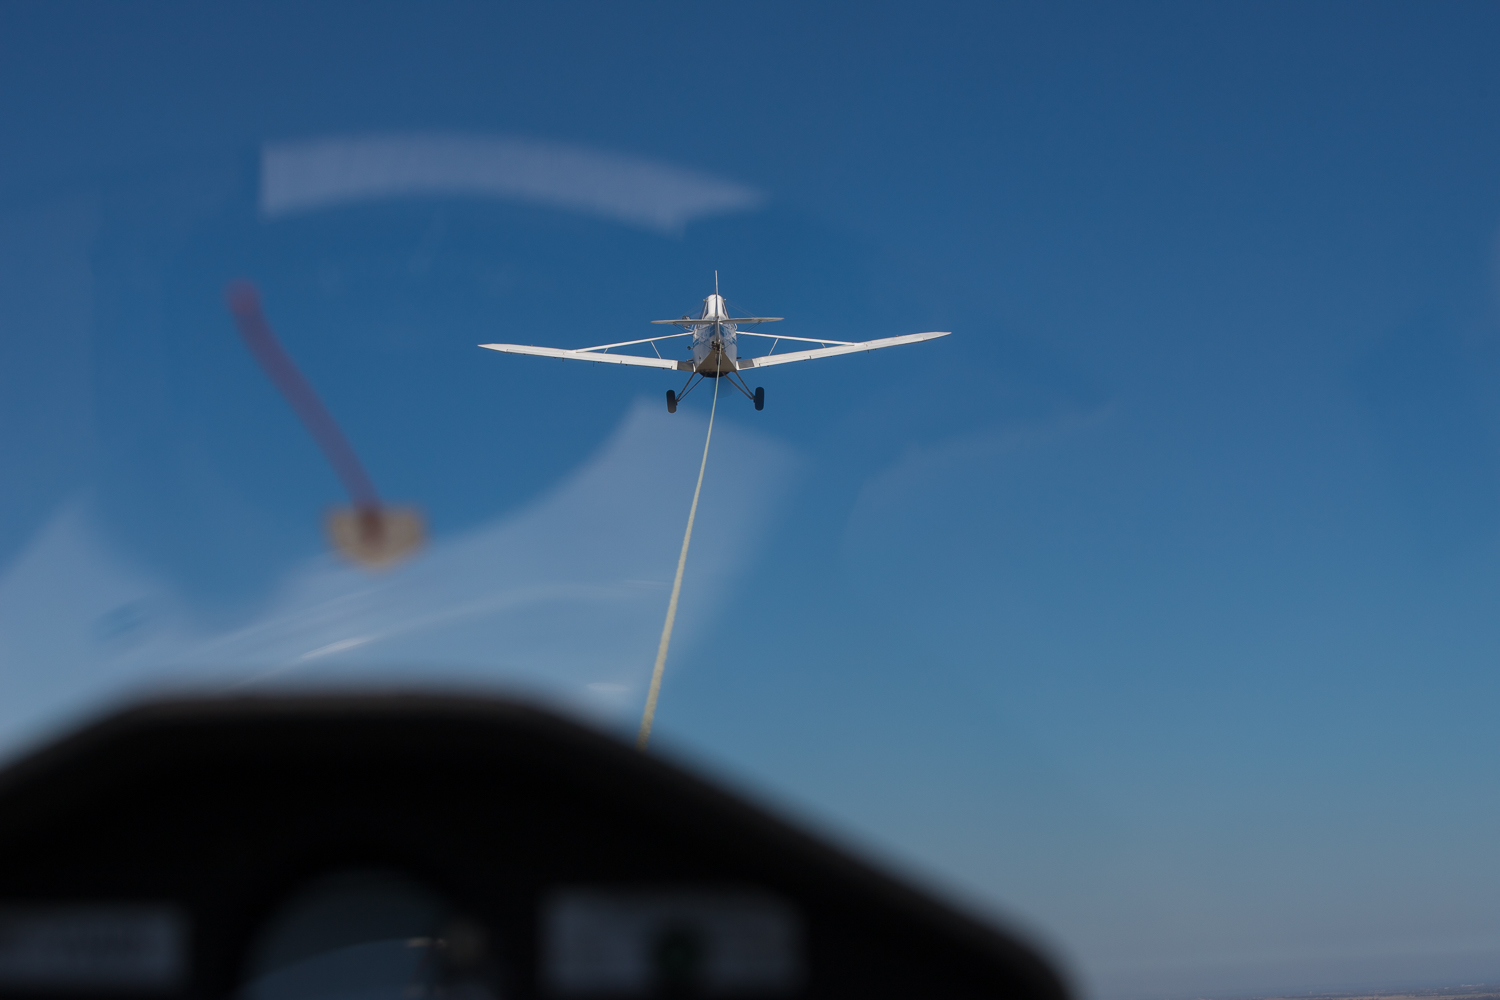 A photo shoot about gliding and flying in Australia